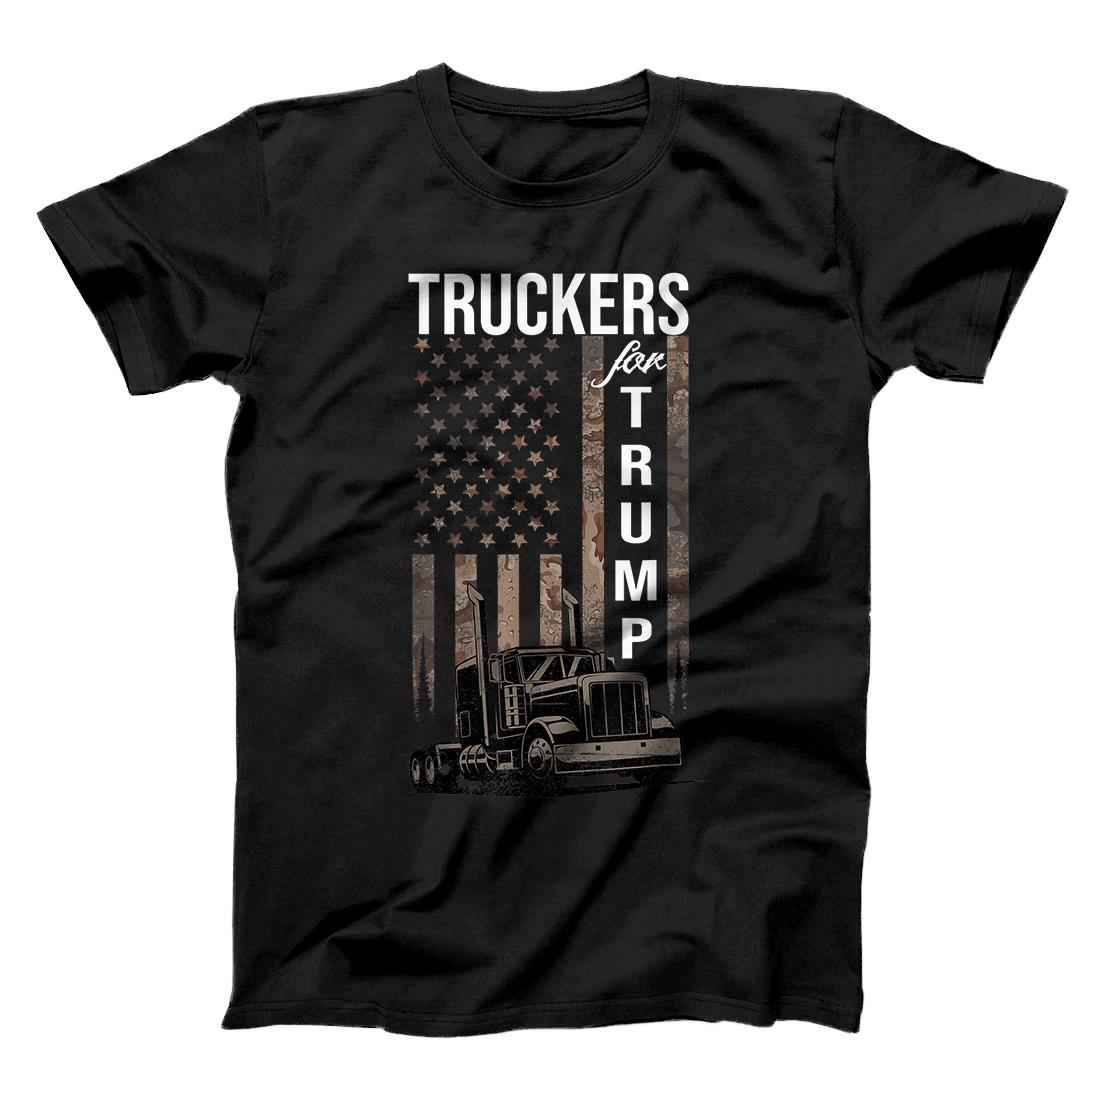 Personalized Truckers for Trump - Pro Trump 2020 Trucker Driver Gift T-Shirt